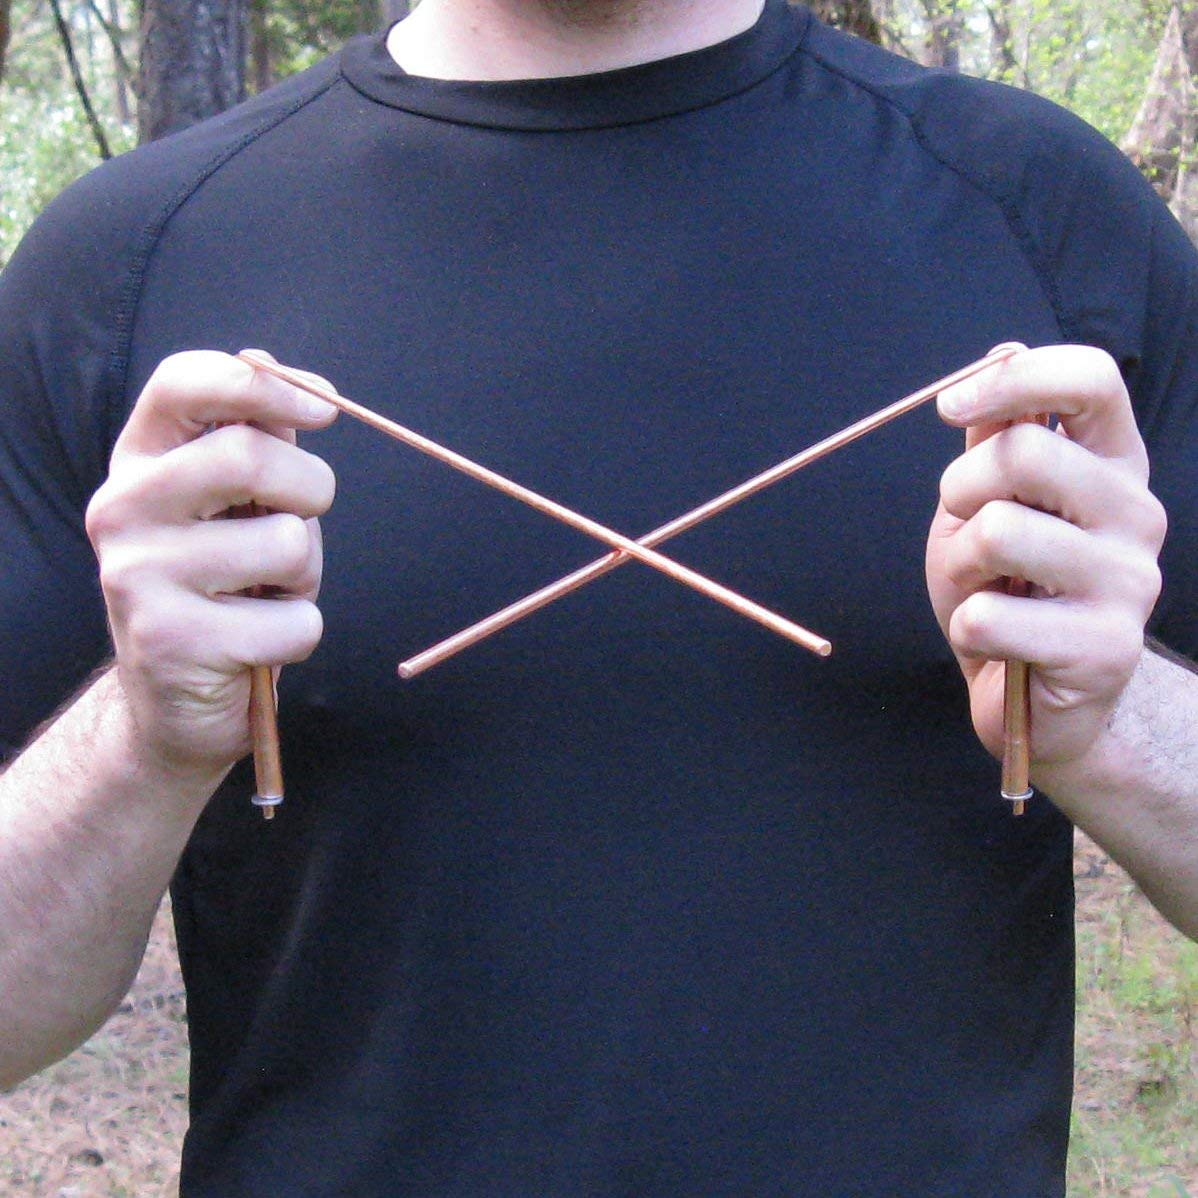  If you consider yourself a more old school or analogue ghost tracker, there's nothing wrong with a set of dowsing rods.<br><br>Acquire some for your collection <a href="https://amzn.to/2OI4bin" "nofollow" target="_blank">here.</a>